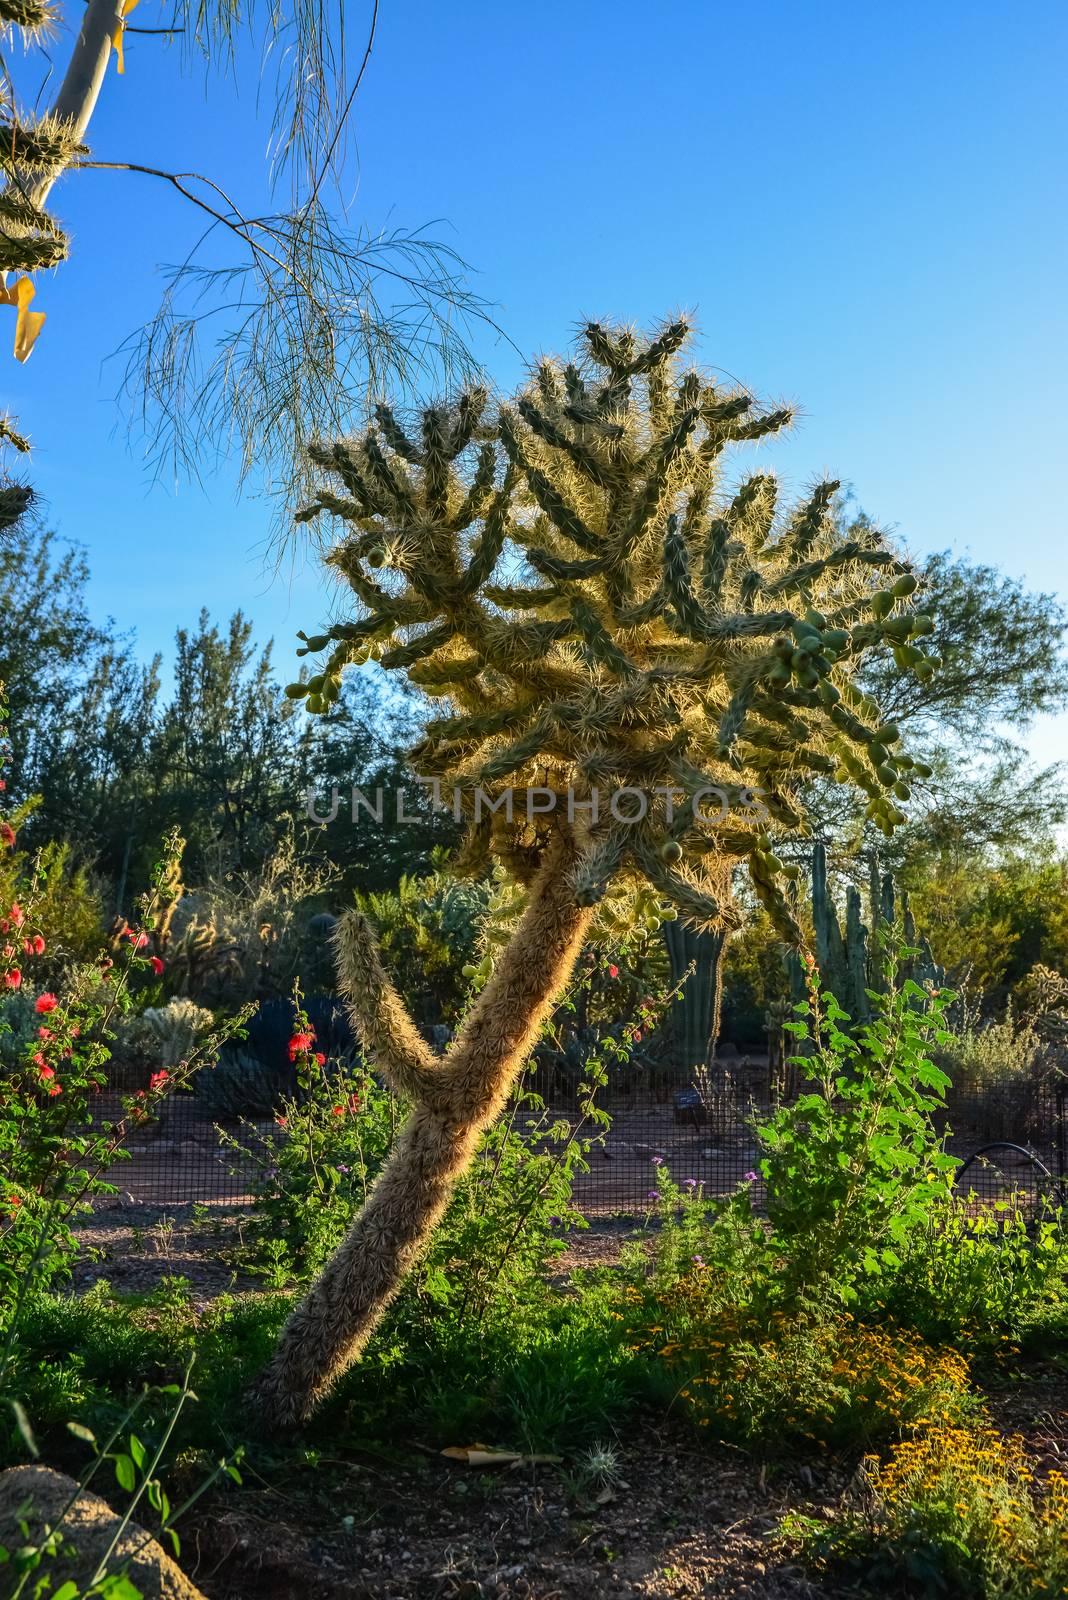 A group of succulent plants of Opuntia cacti in the Phoenix Botanical Garden, Arizona, USA